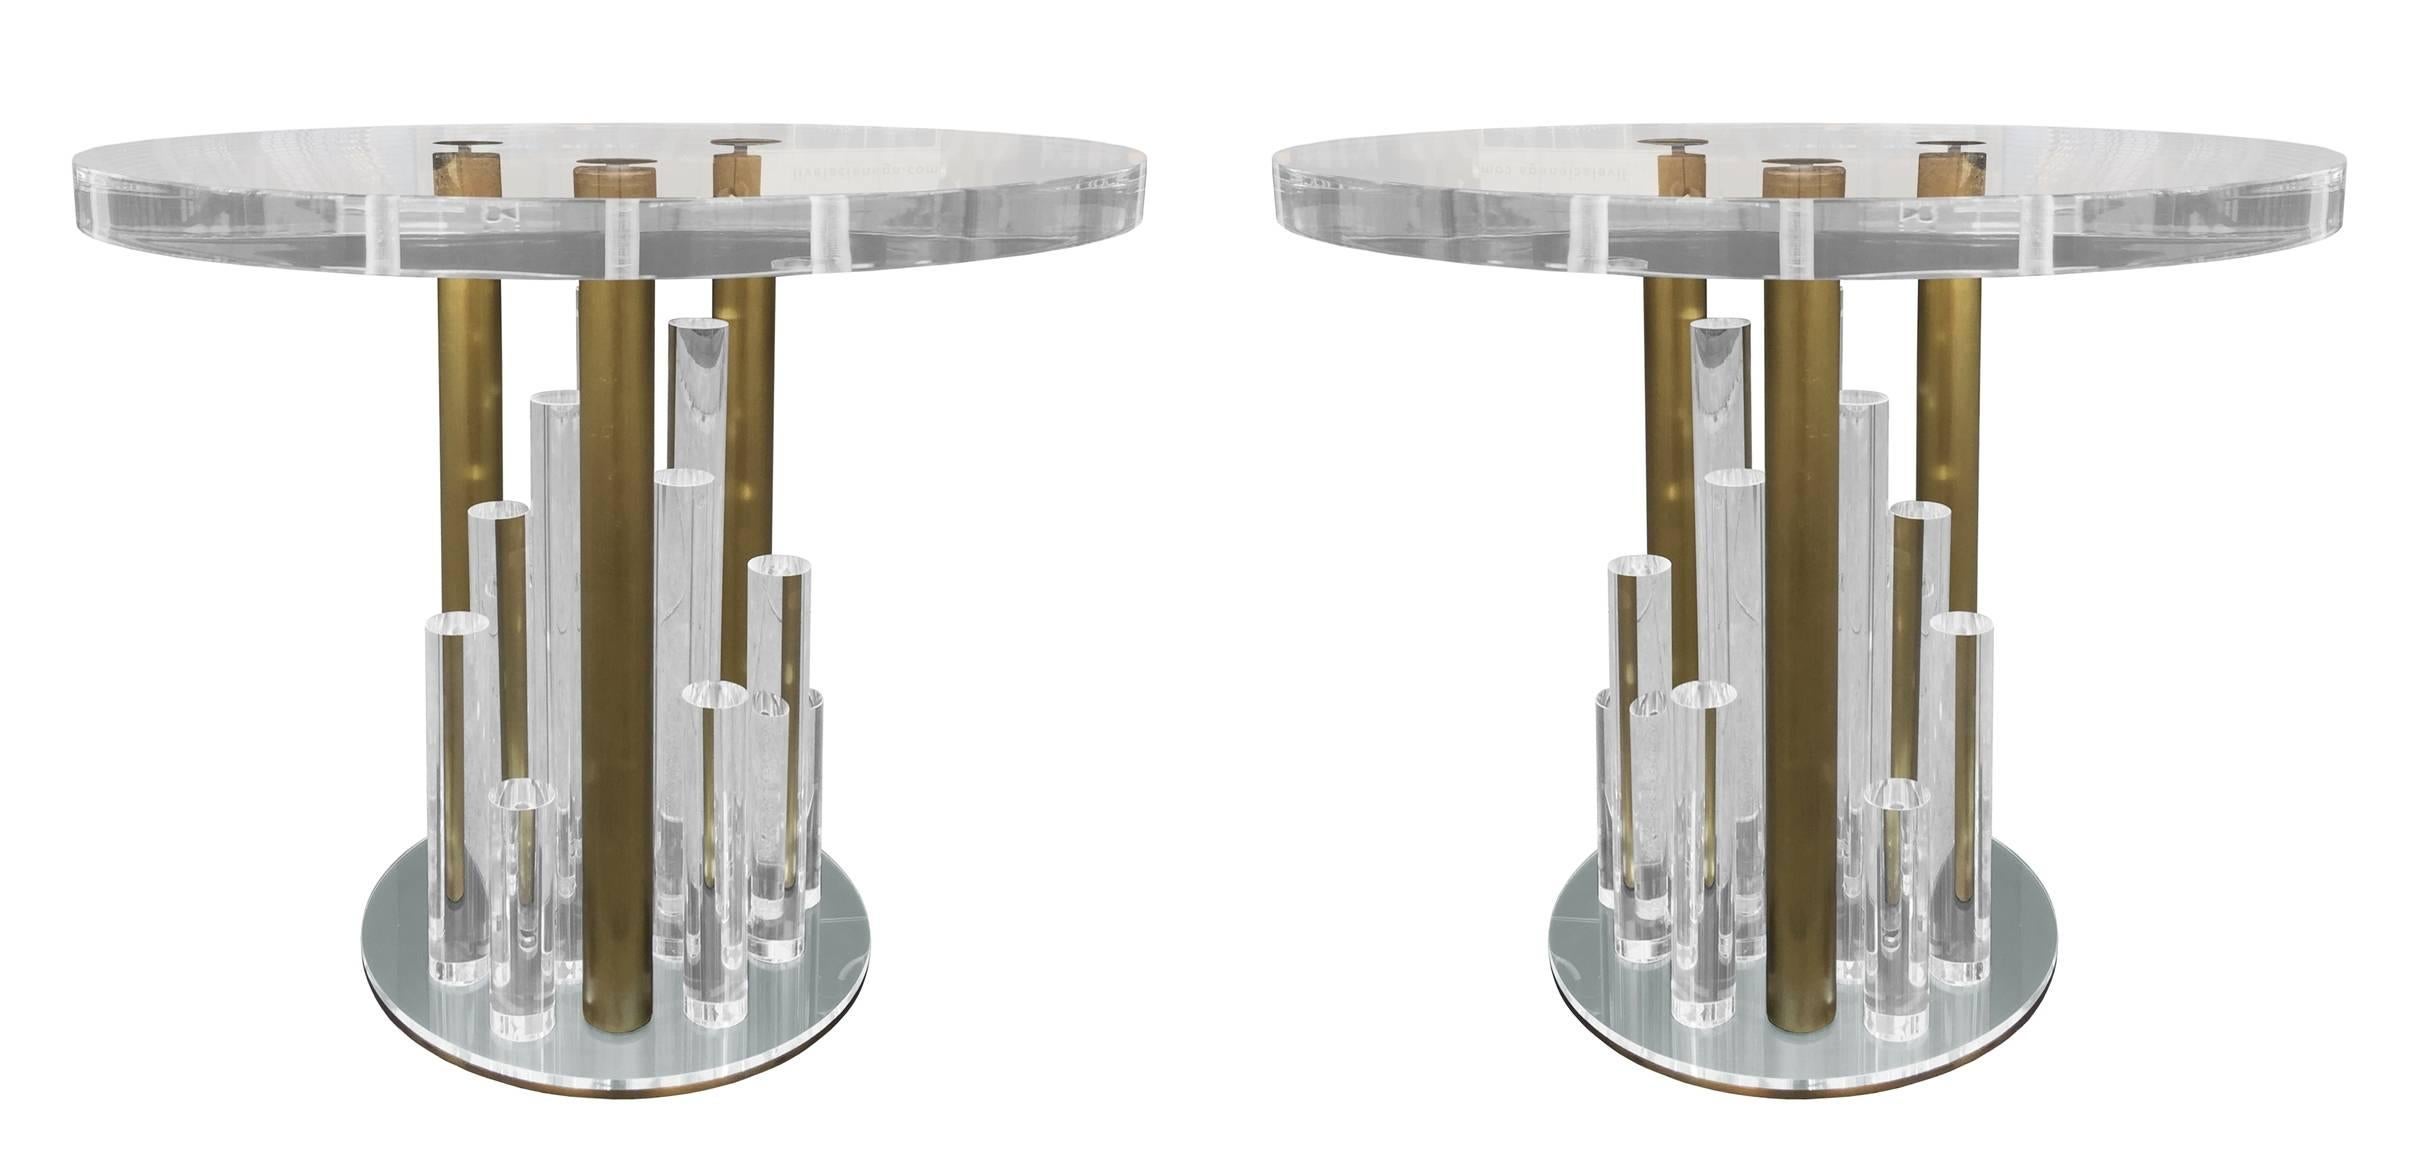 Beautiful set of side tables in Lucite and brass designed and manufactured by Charles Hollis Jones in the early 1970s.
These 